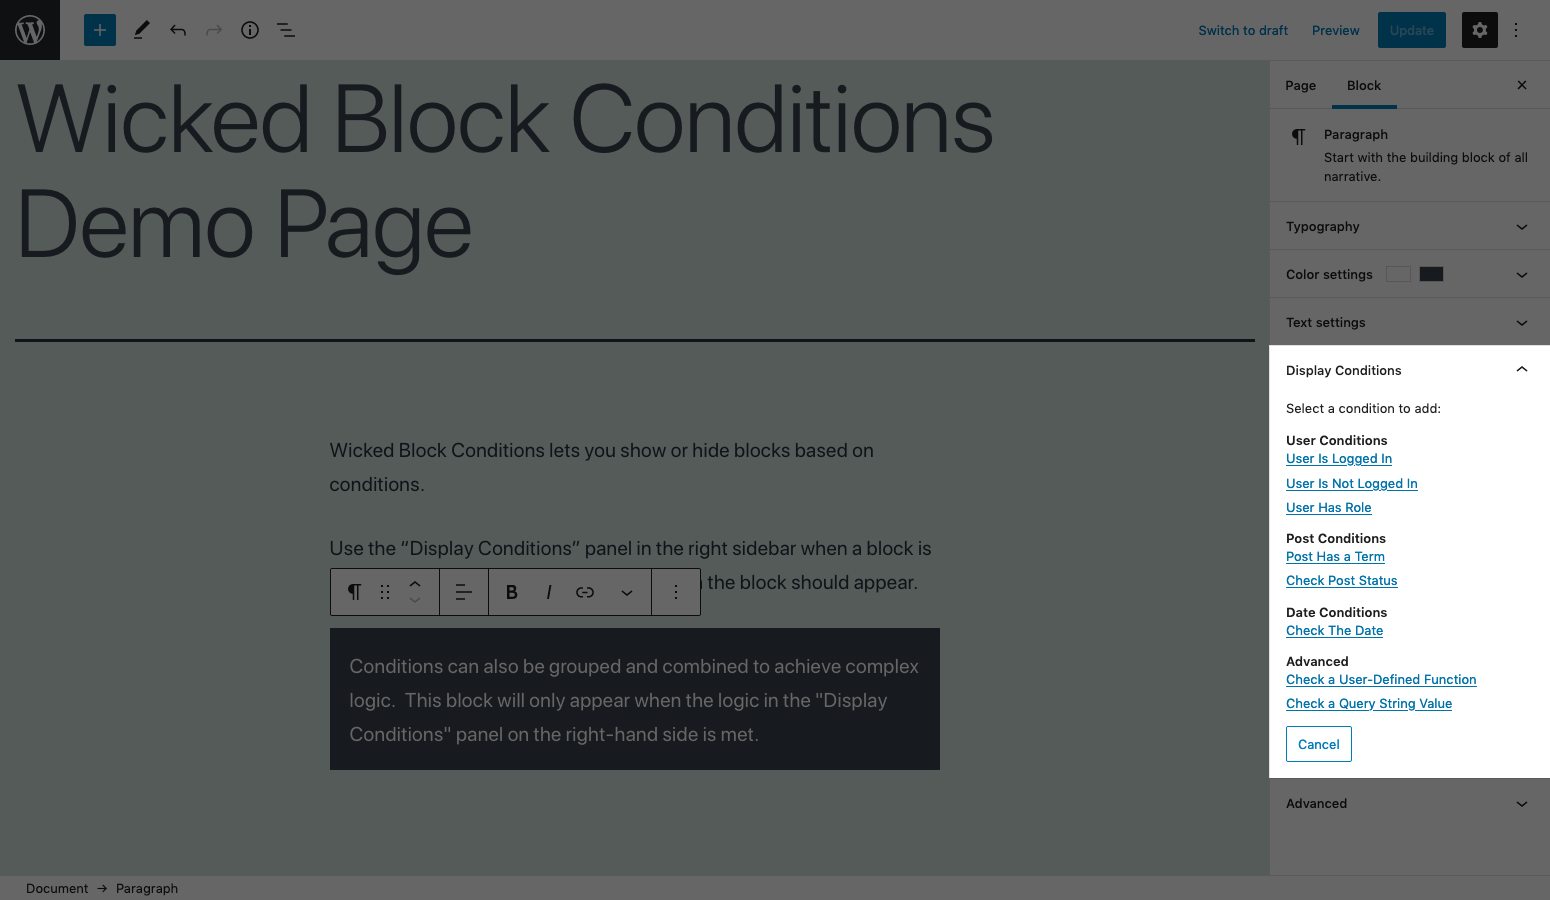 Various conditions can be used to show or hide blocks